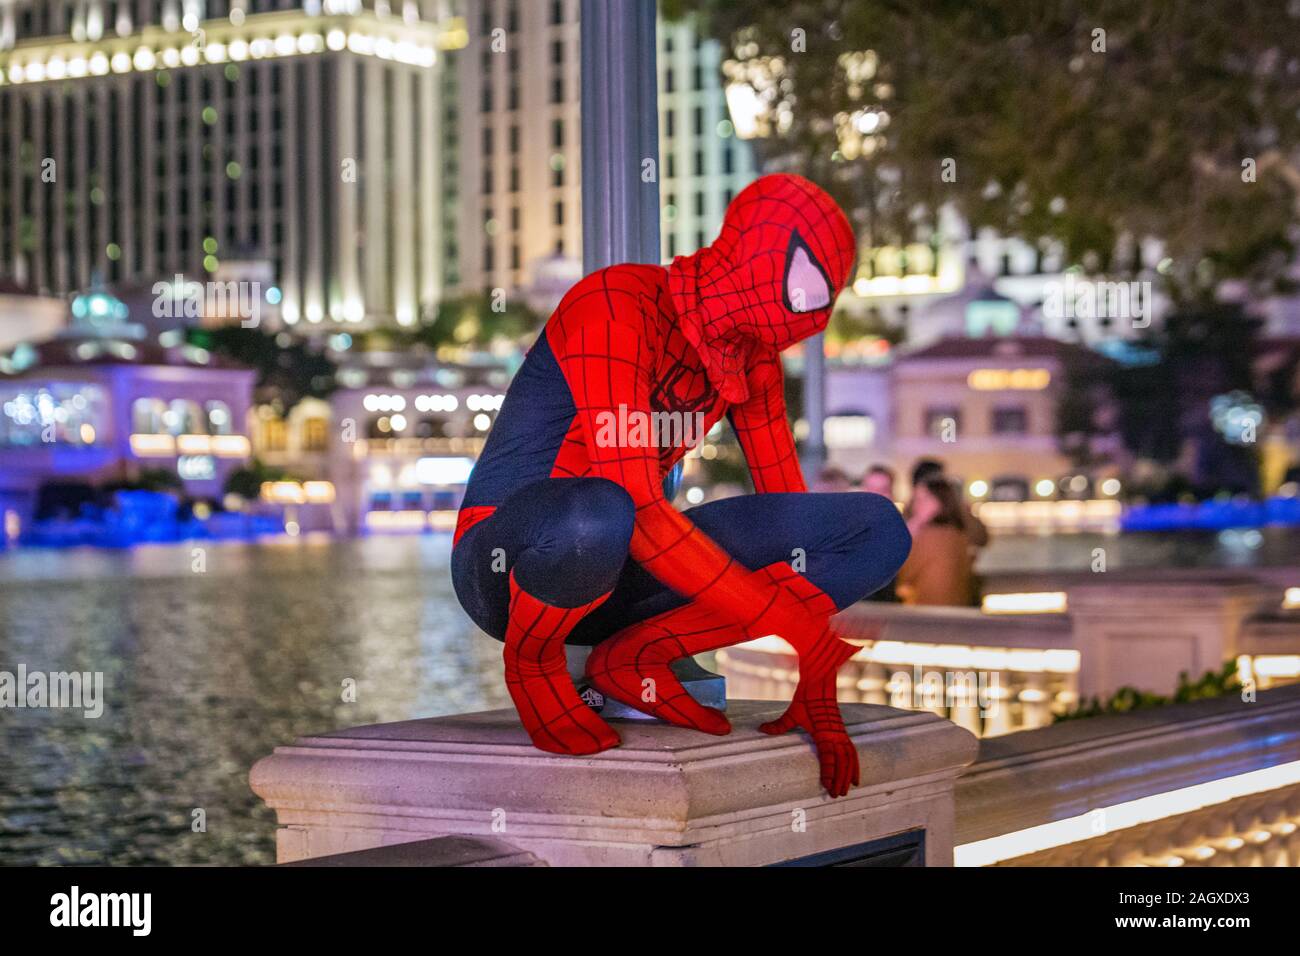 LAS VEGAS - JANUARY 24, 2018: Spiderman near fountains of Bellagio have been featured in several movies, is a large dancing water fountain synchronize Stock Photo